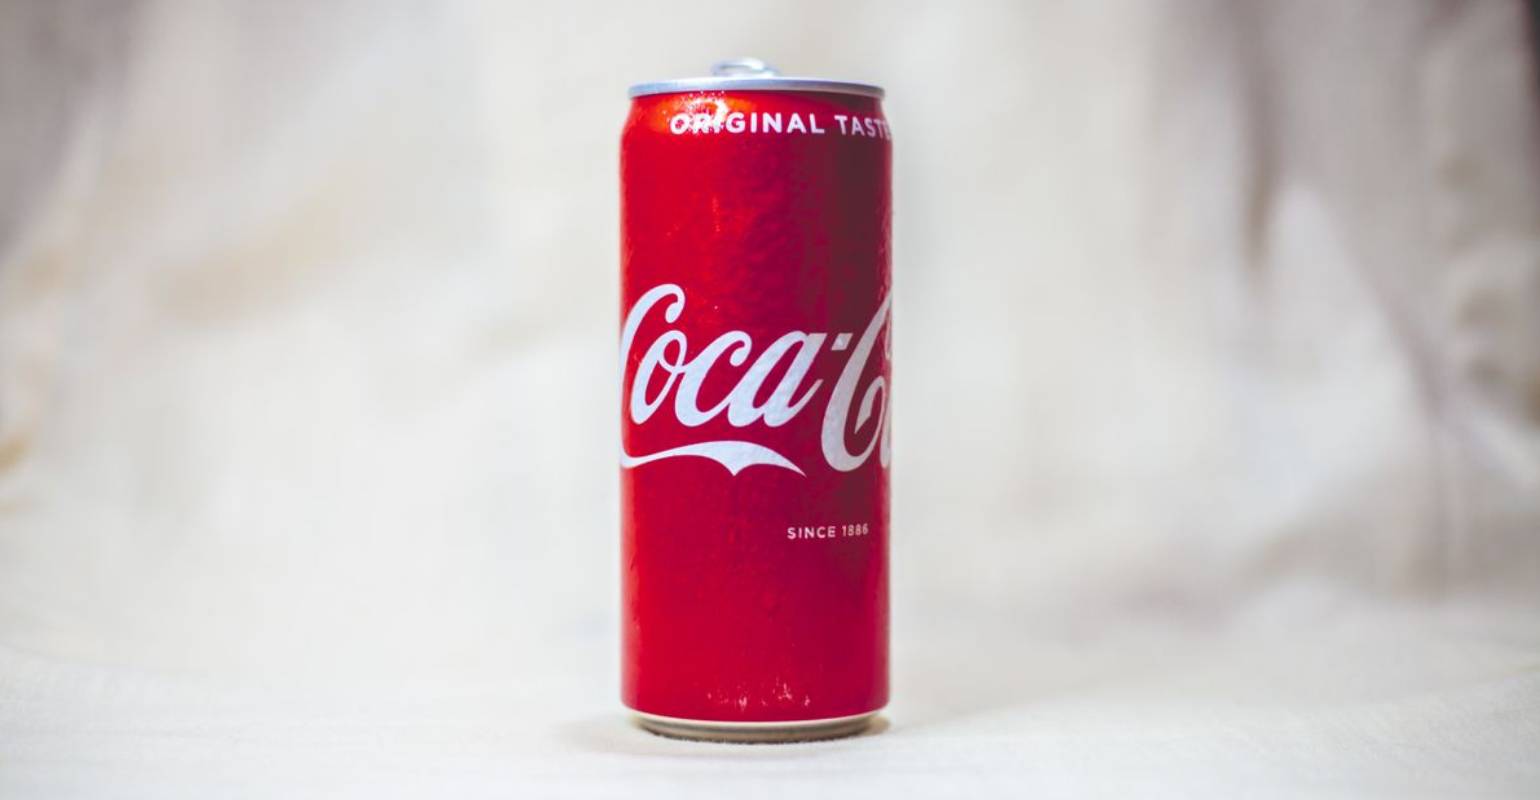 Coco cola in red package